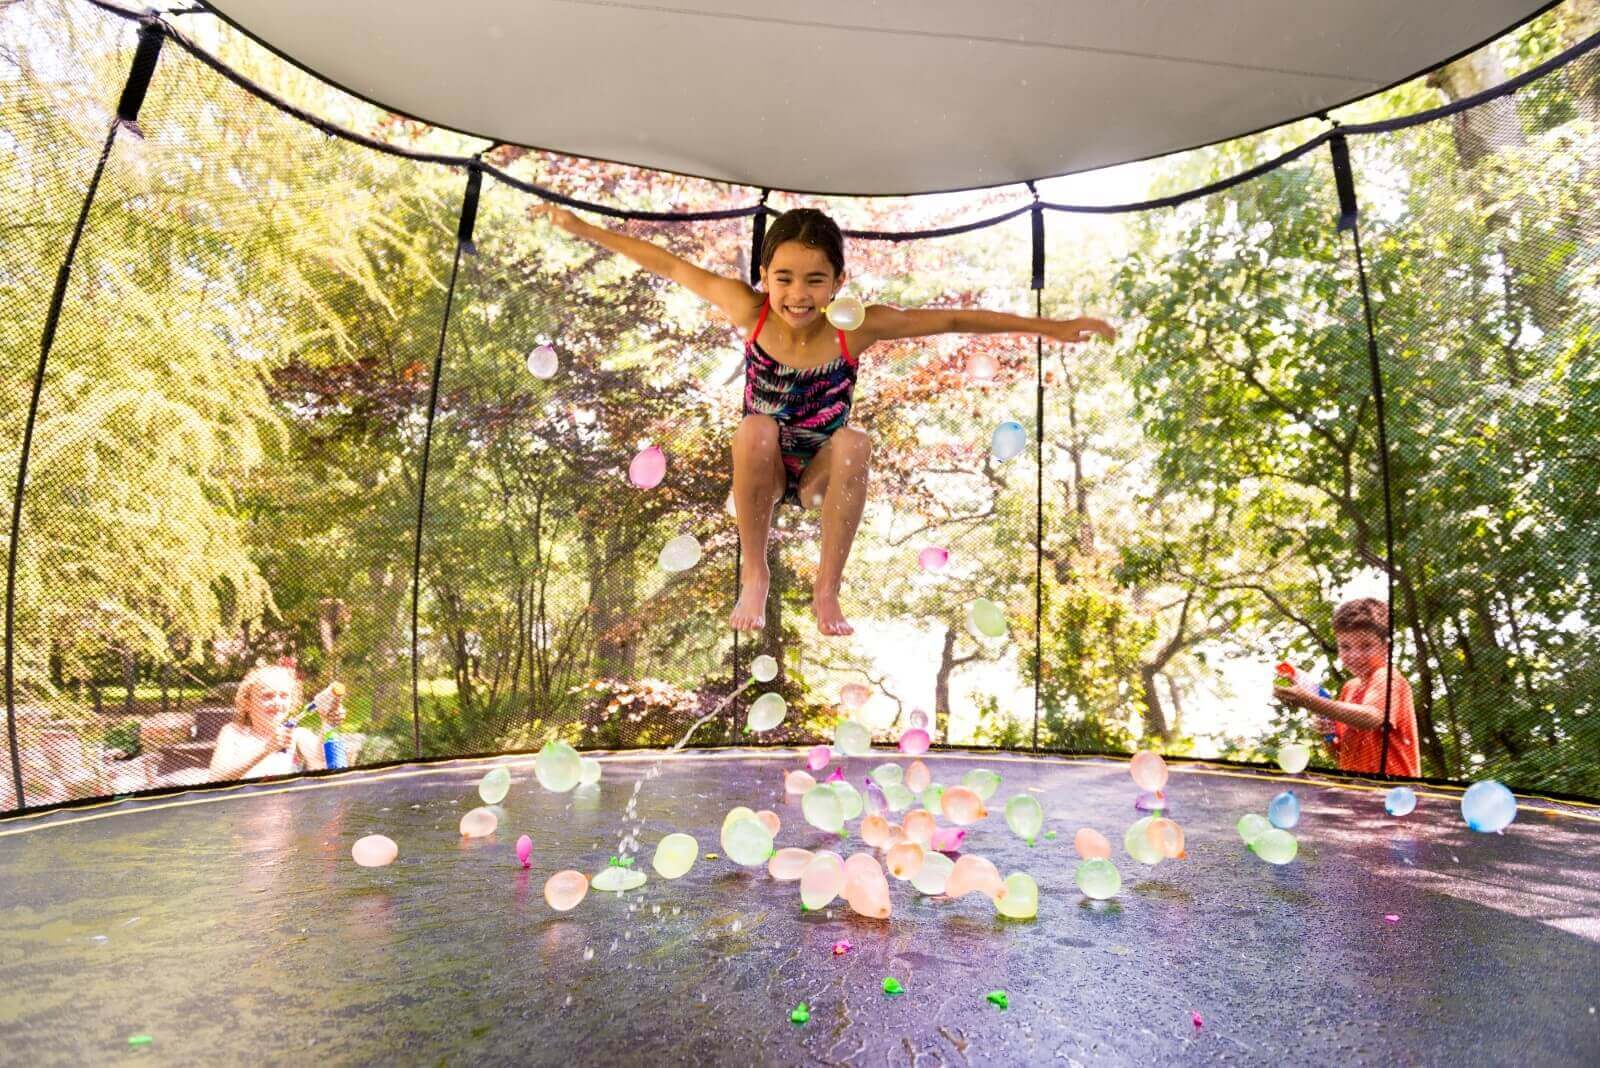 A girl jumping on a trampoline with a sunshade